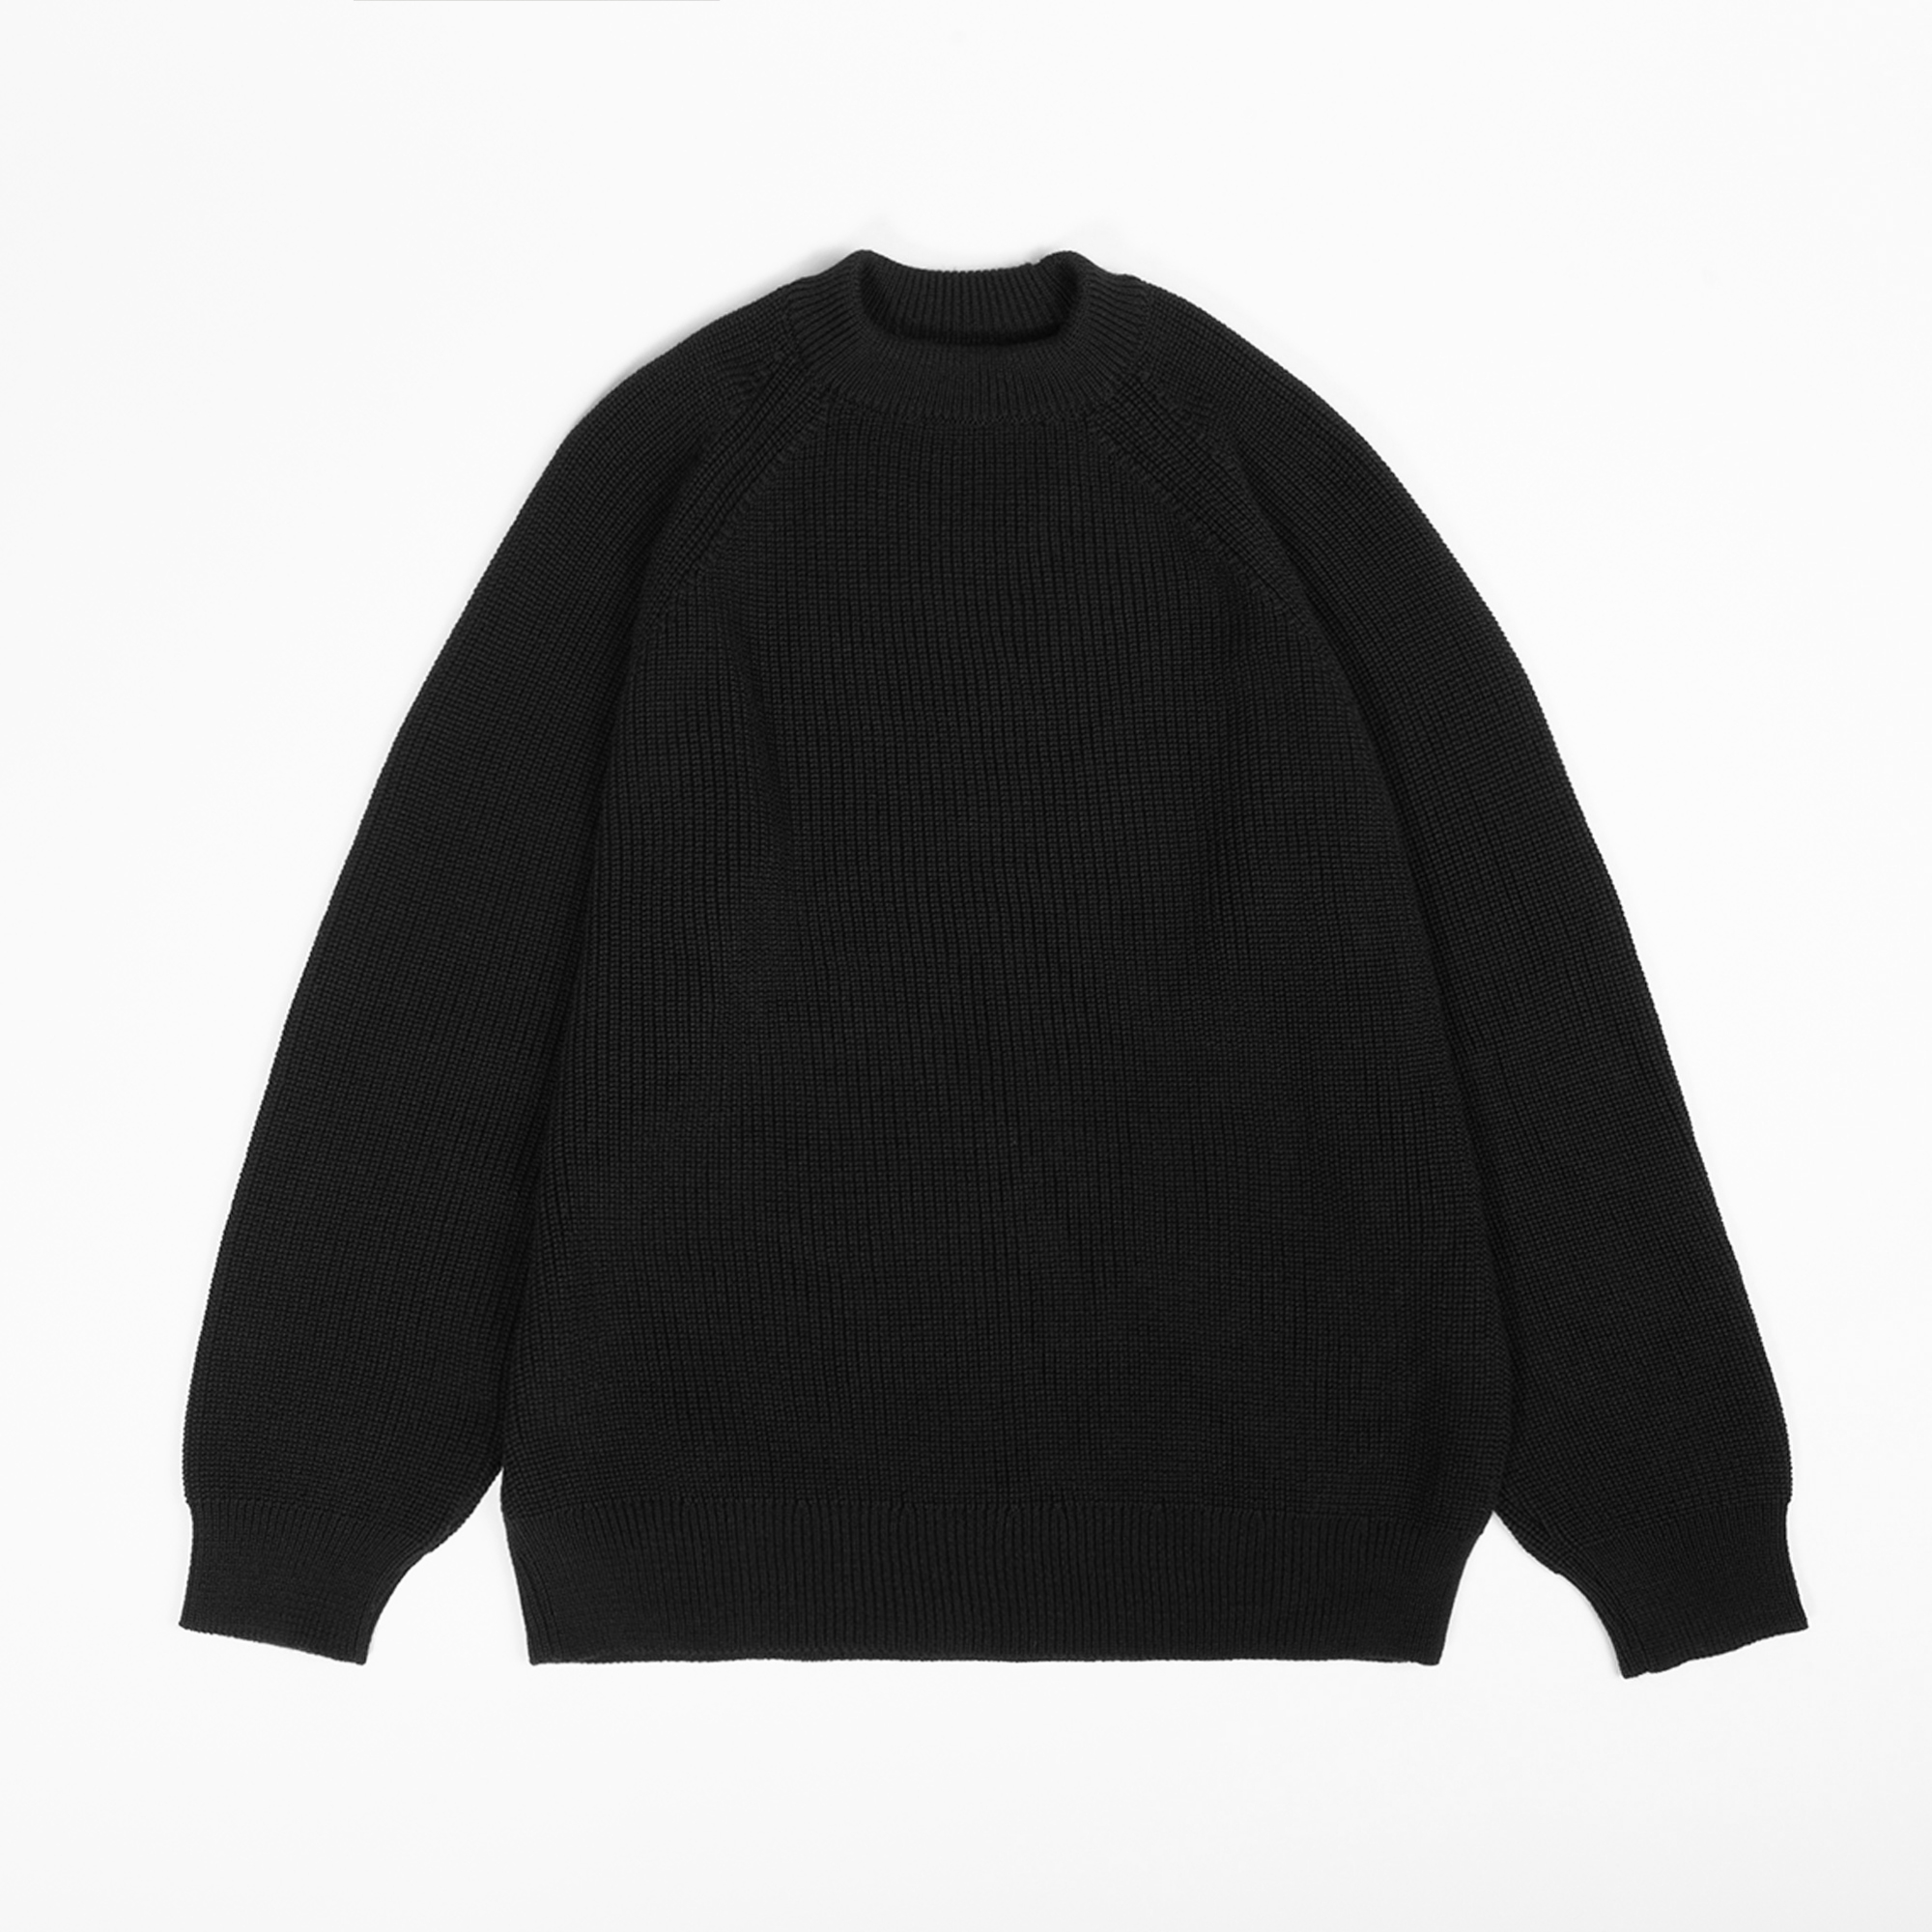 PLANO sweater in Black color by Arpenteur